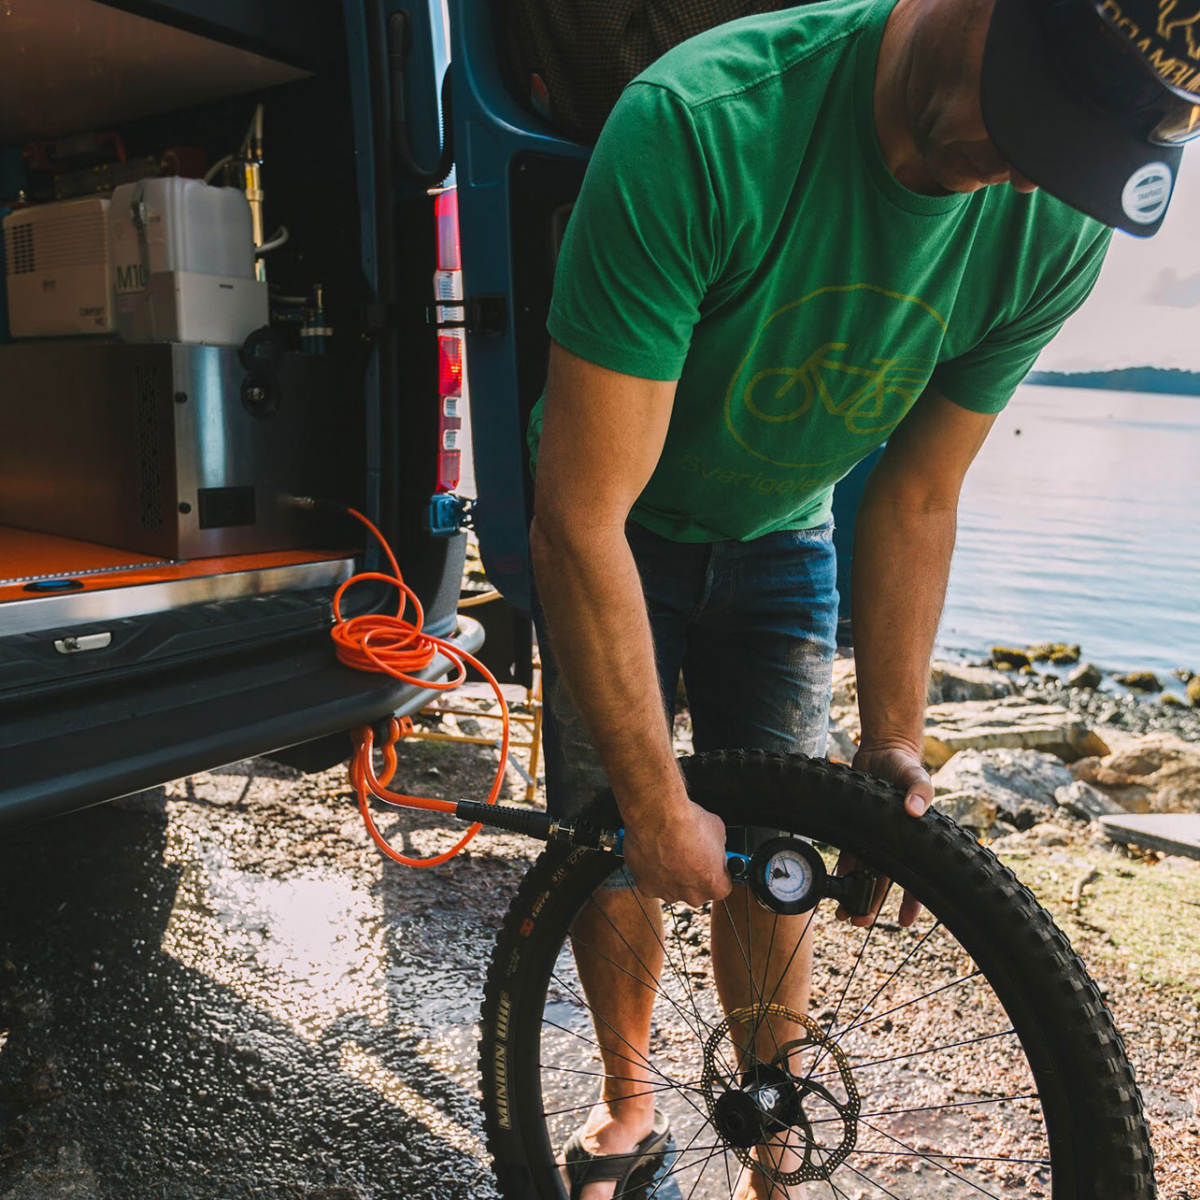 Nomad Vanz Yabba Dabba Doo camper. This camper comes with a built in tyre pumping station for your bike. 